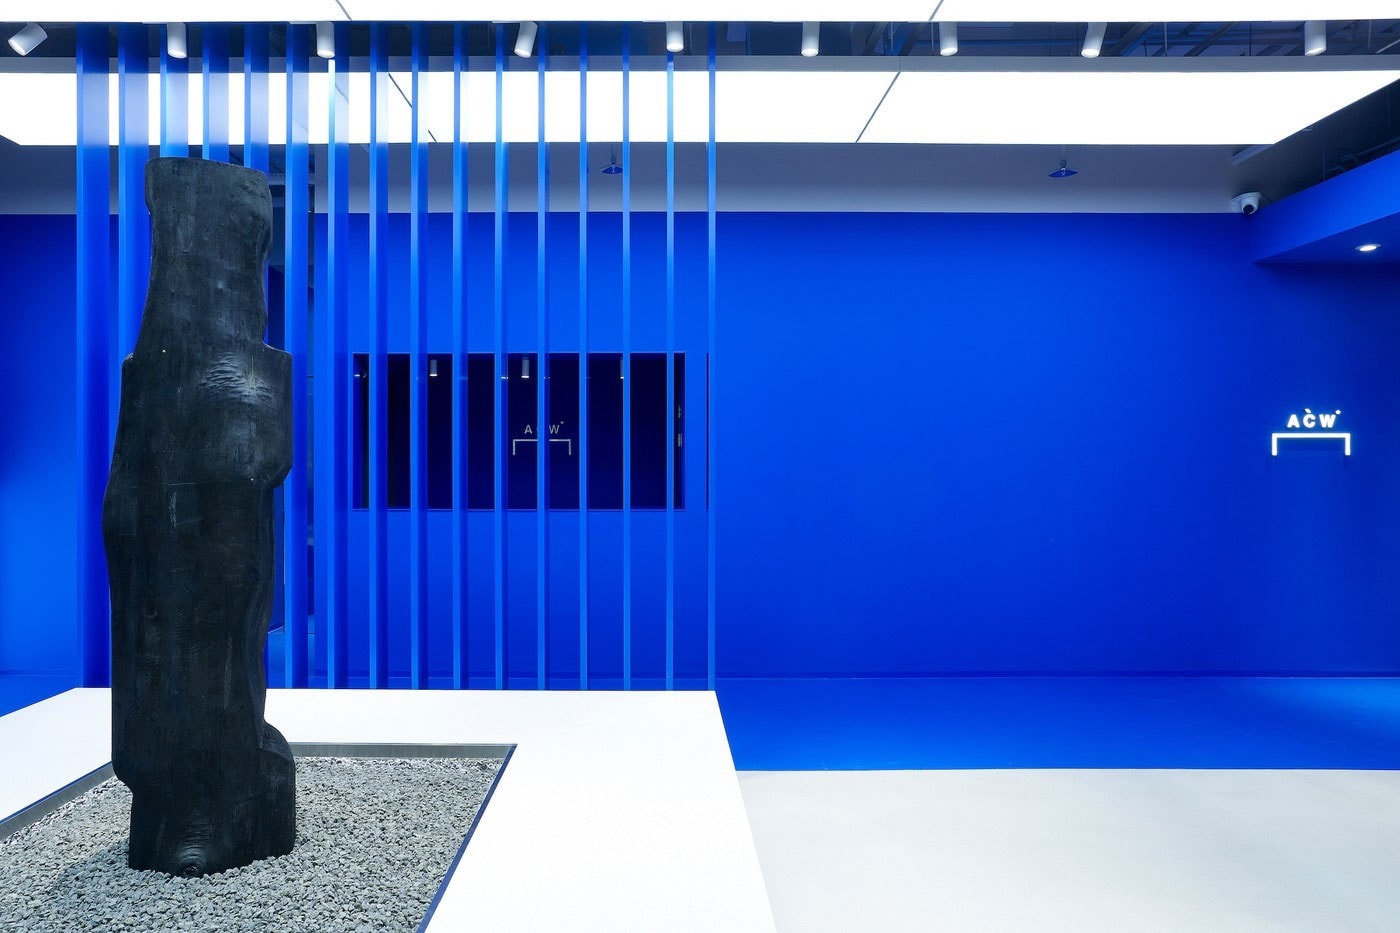 A Cold Wall Shanghai Concept Store Opening inside look interiors step into blue white glass industrial design team china second Taikoo Li Qiantan news info